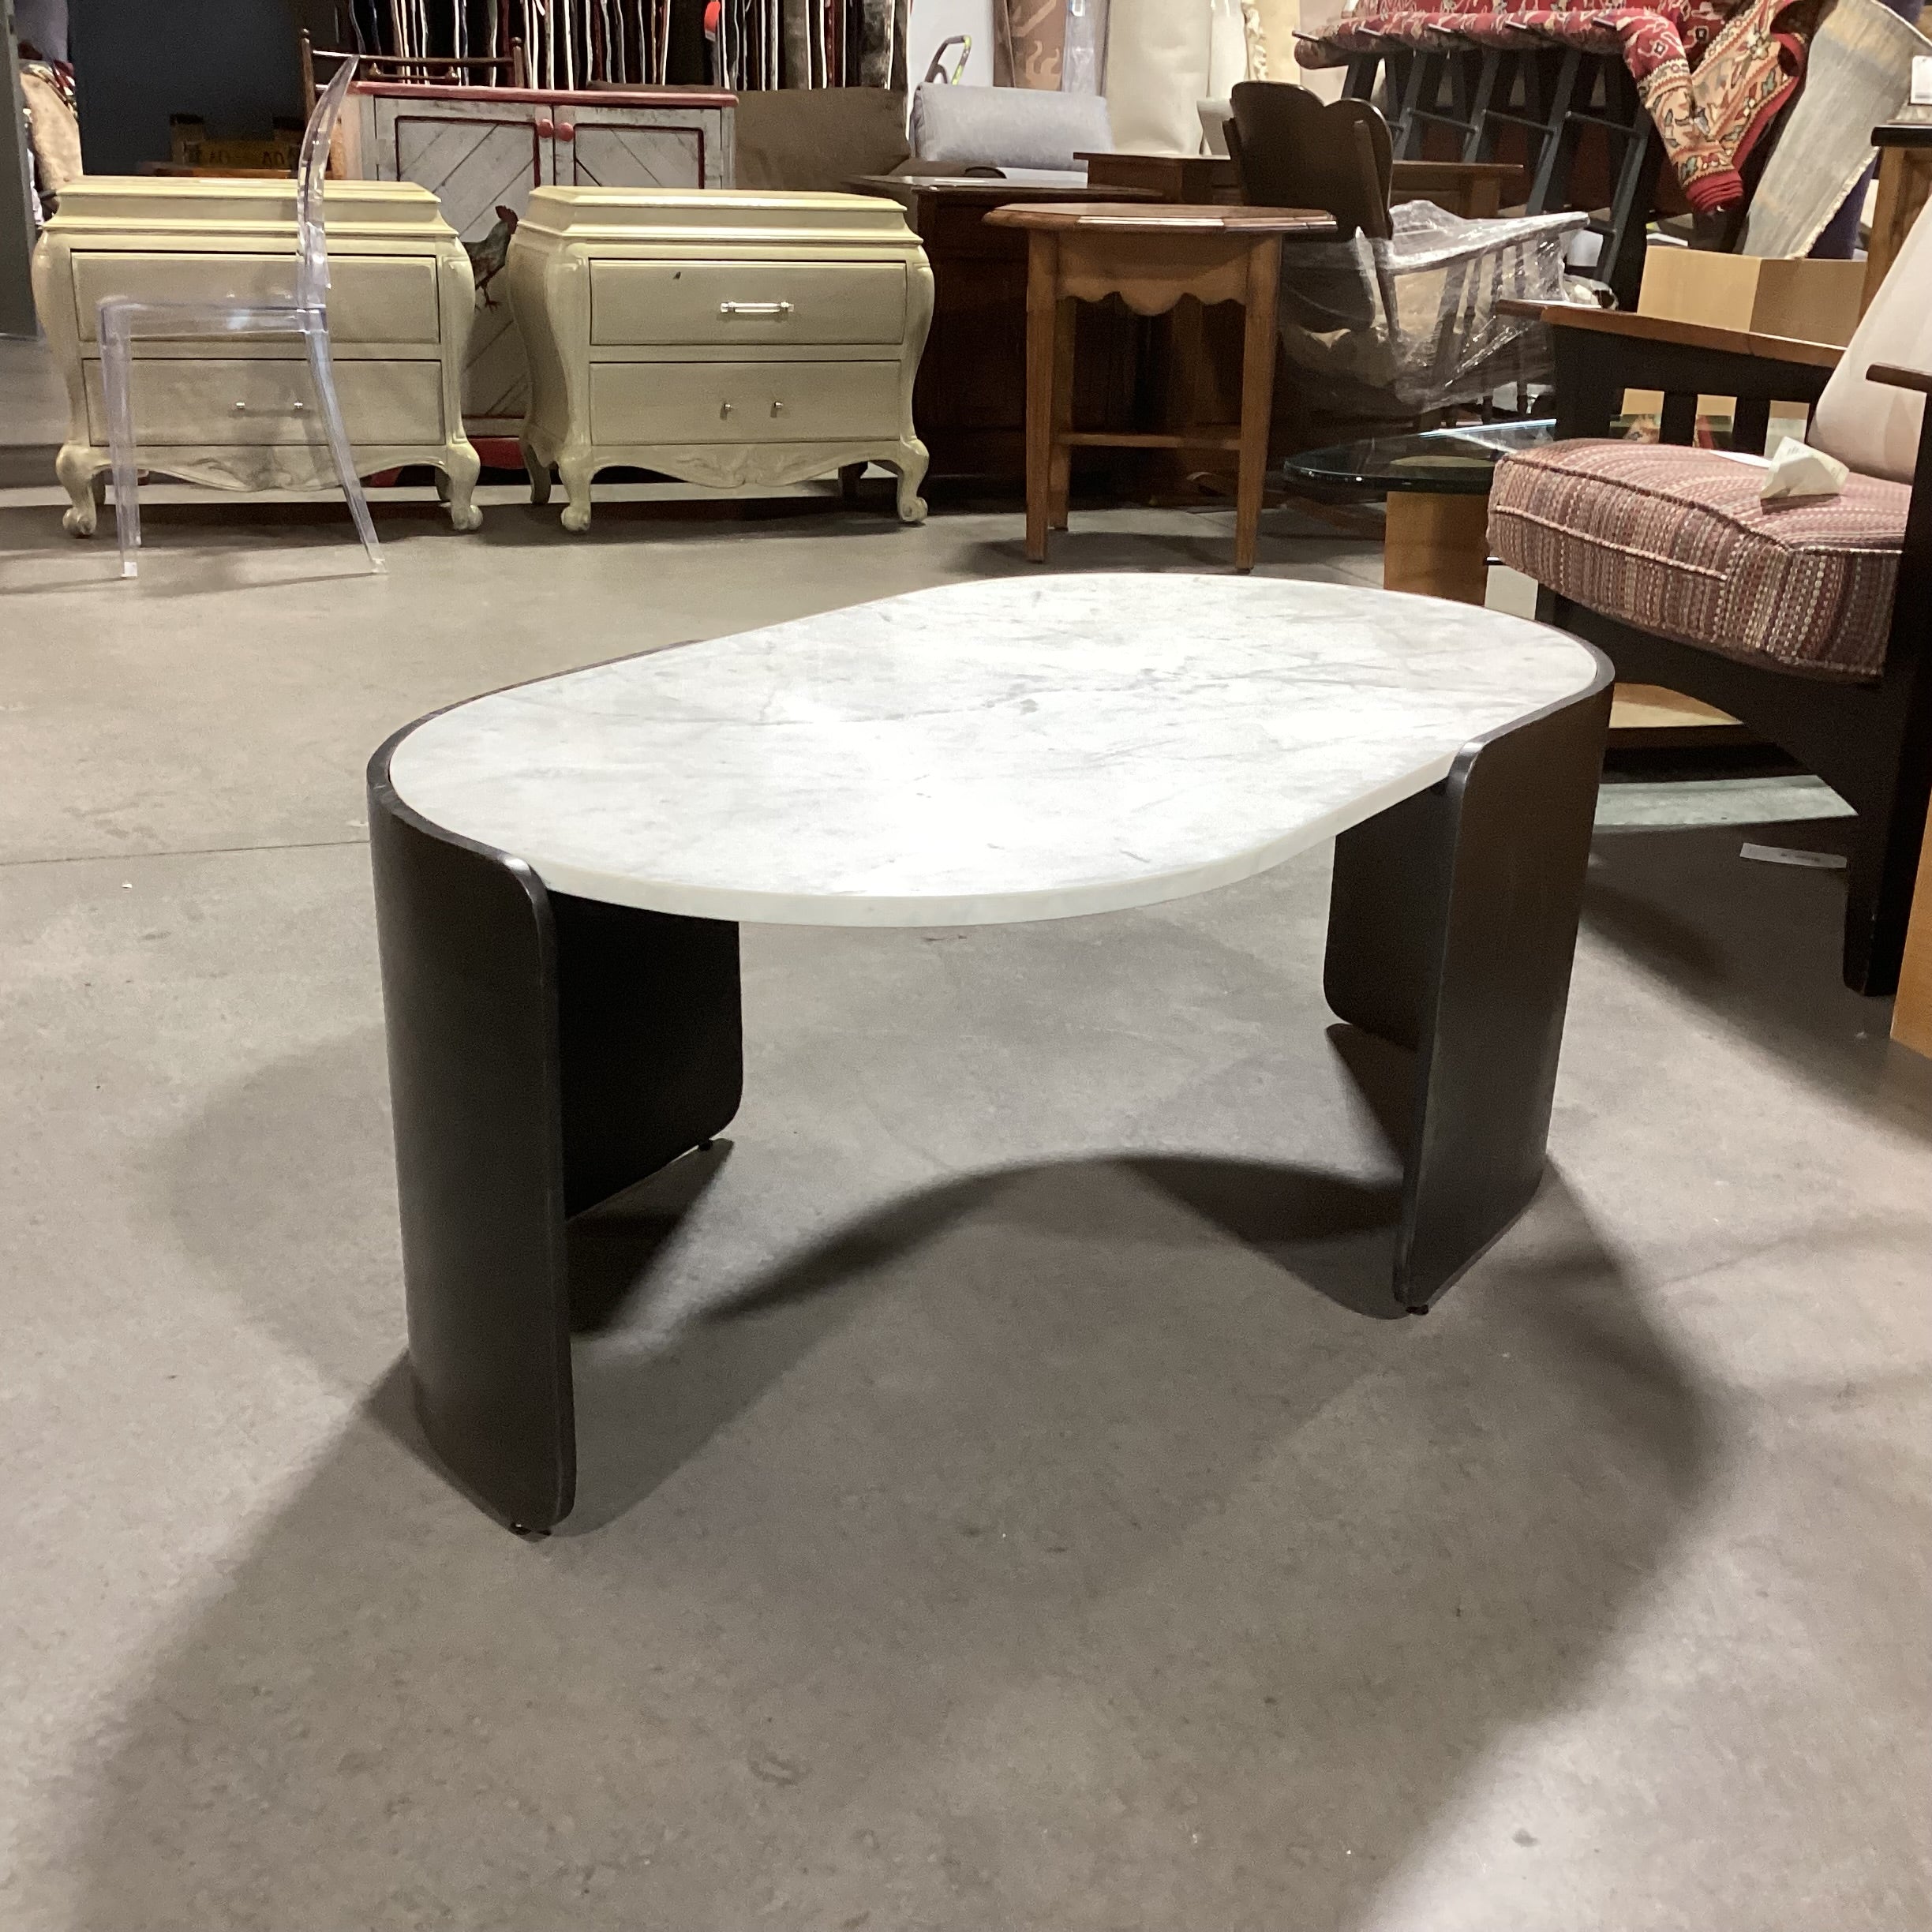 Marble & Sculptured Metal Coffee Table 44.5"x 25.5"x 17"